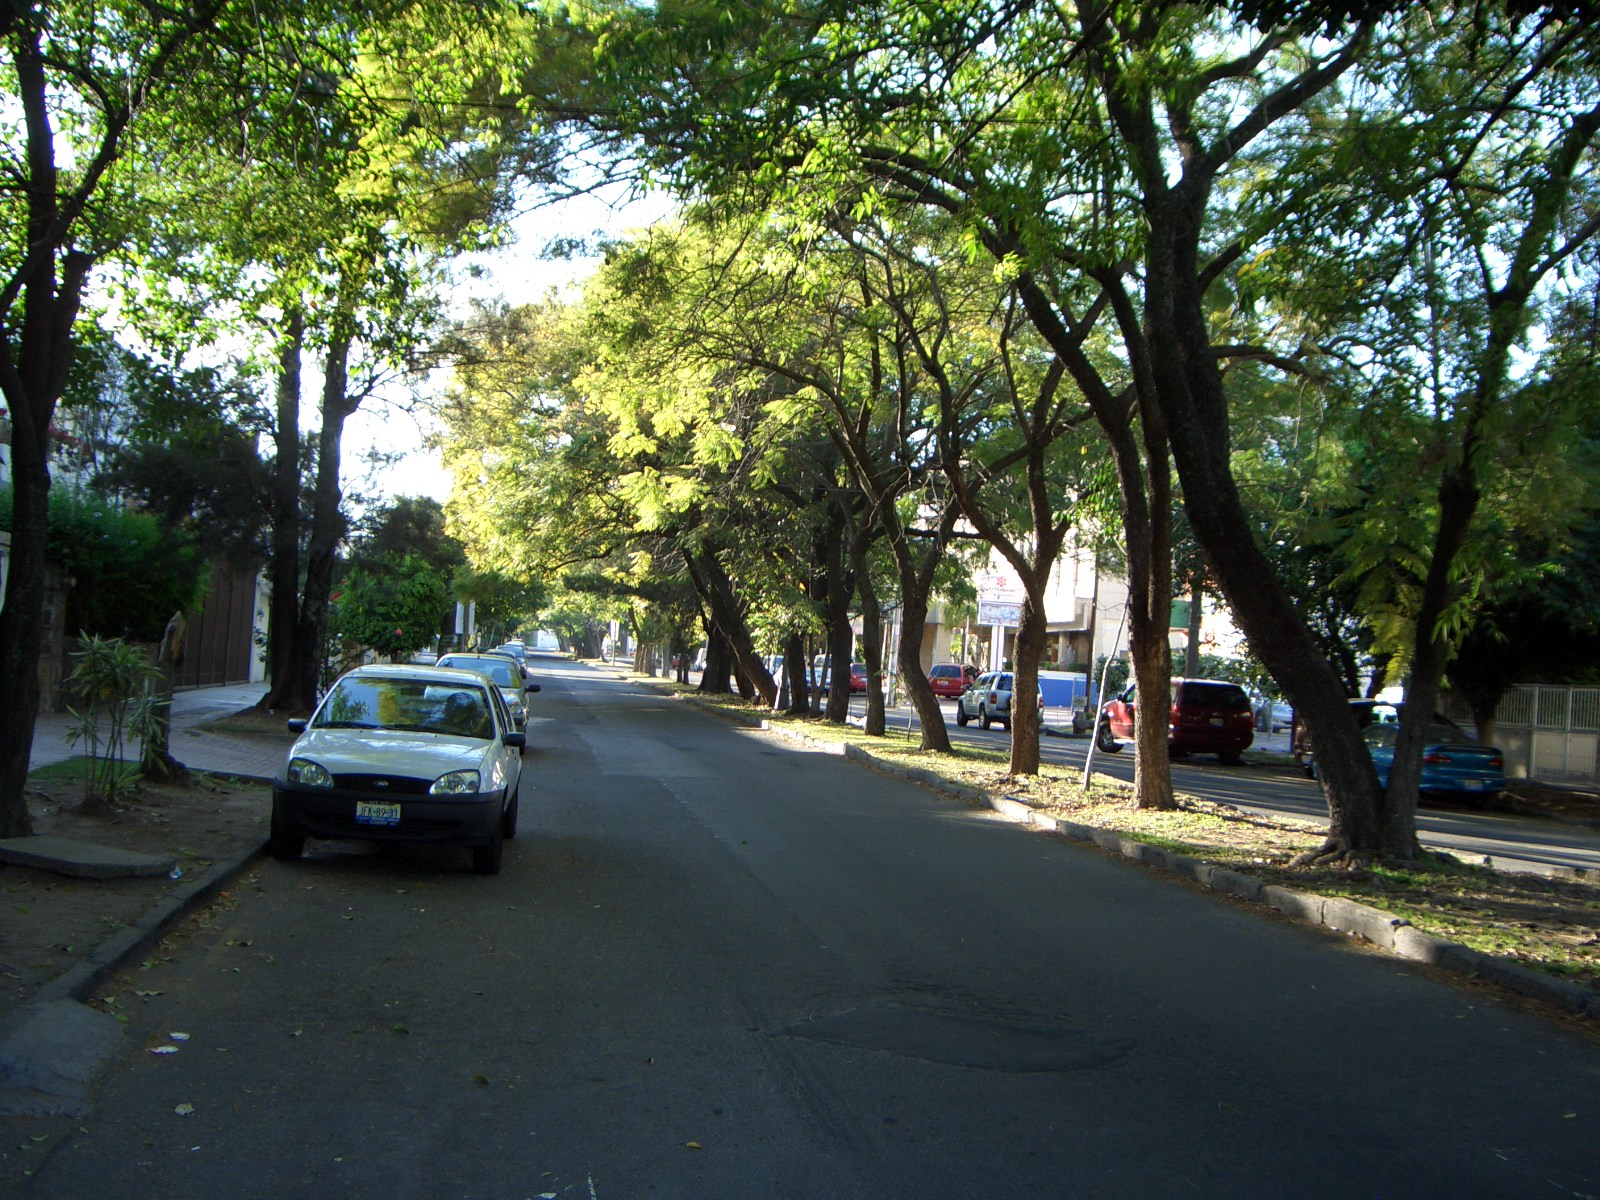 a car is parked along a street lined with trees